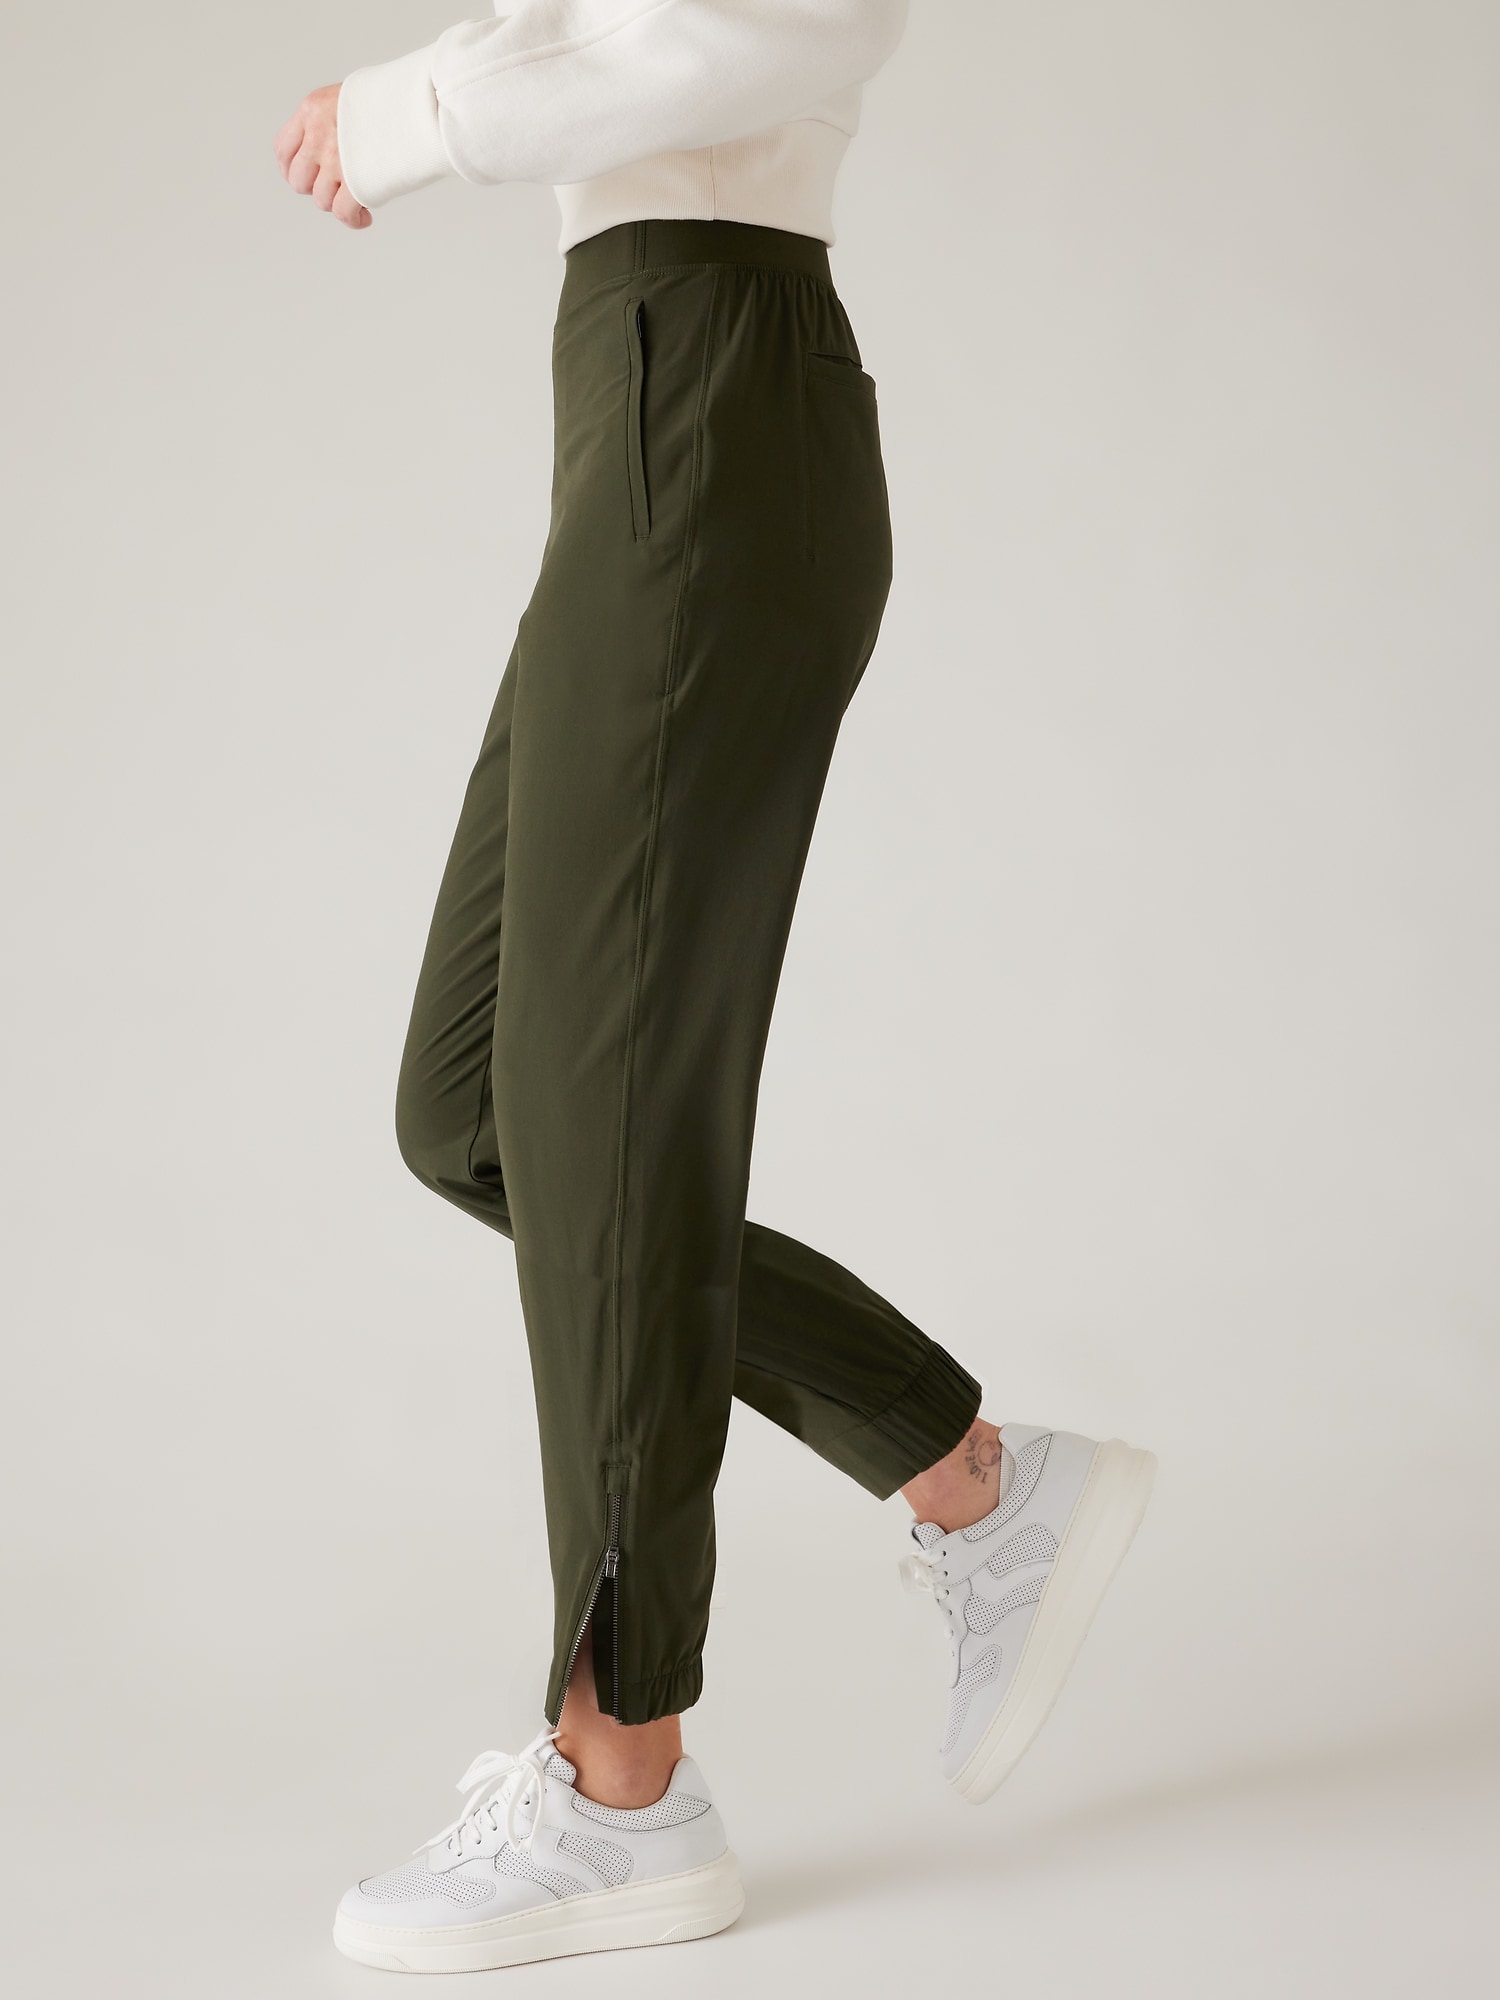 ATHLETA Brooklyn Heights – Activejoyboutique